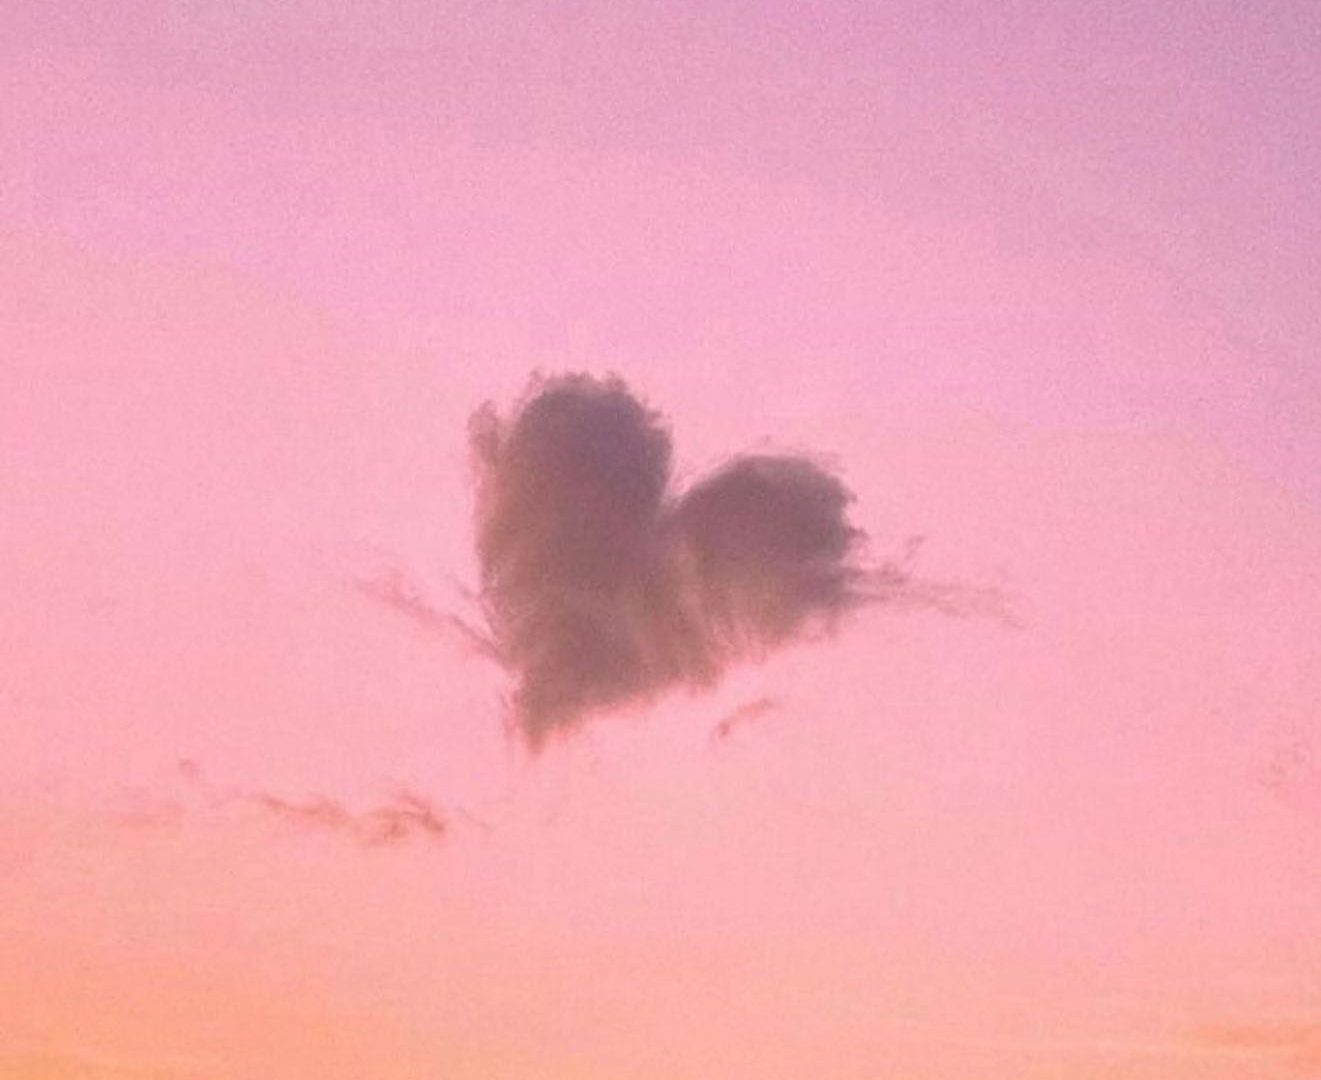 Sending lots of love to all the moms out there today, especially our healing Mother Earth 💕🌎✨// 📸@hi_dongwon•••••#mothersday #motherearth #mom #mama #happymothersday #heart #skyporn